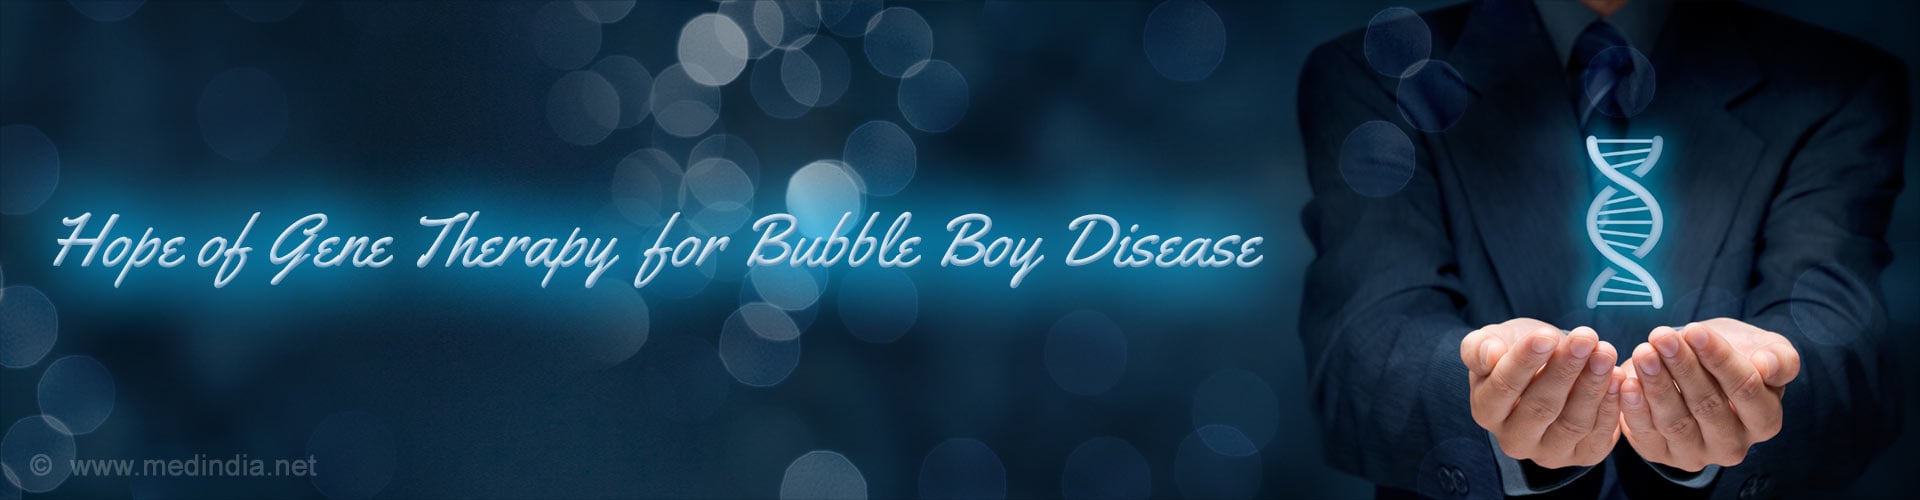 Hope of Gene Therapy for Bubble Boy Disease